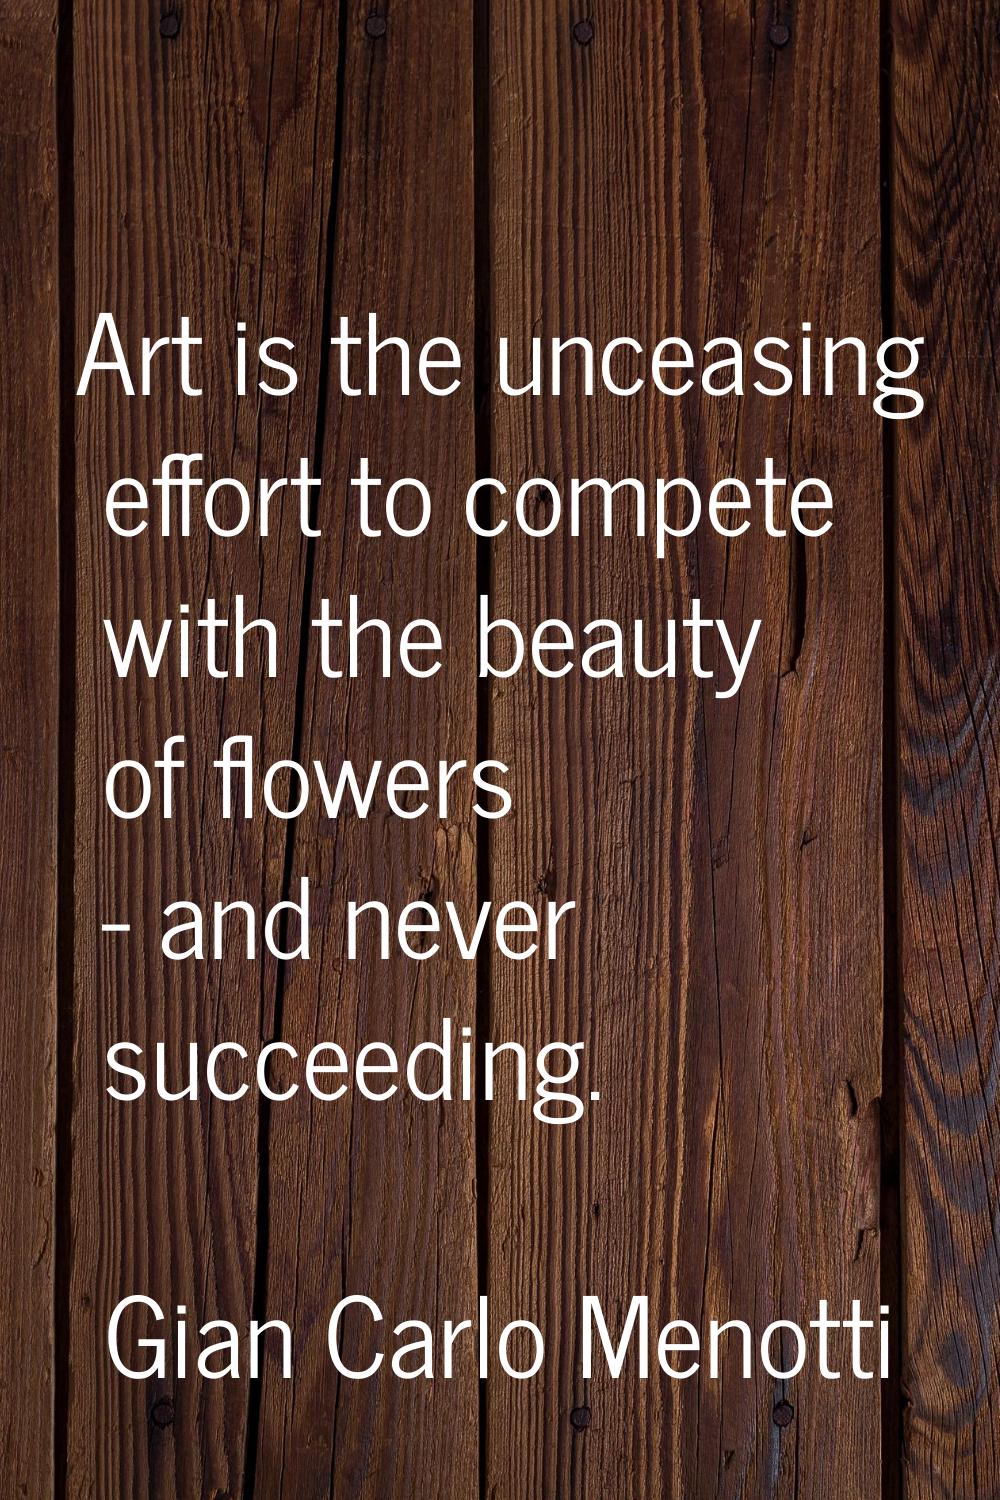 Art is the unceasing effort to compete with the beauty of flowers - and never succeeding.